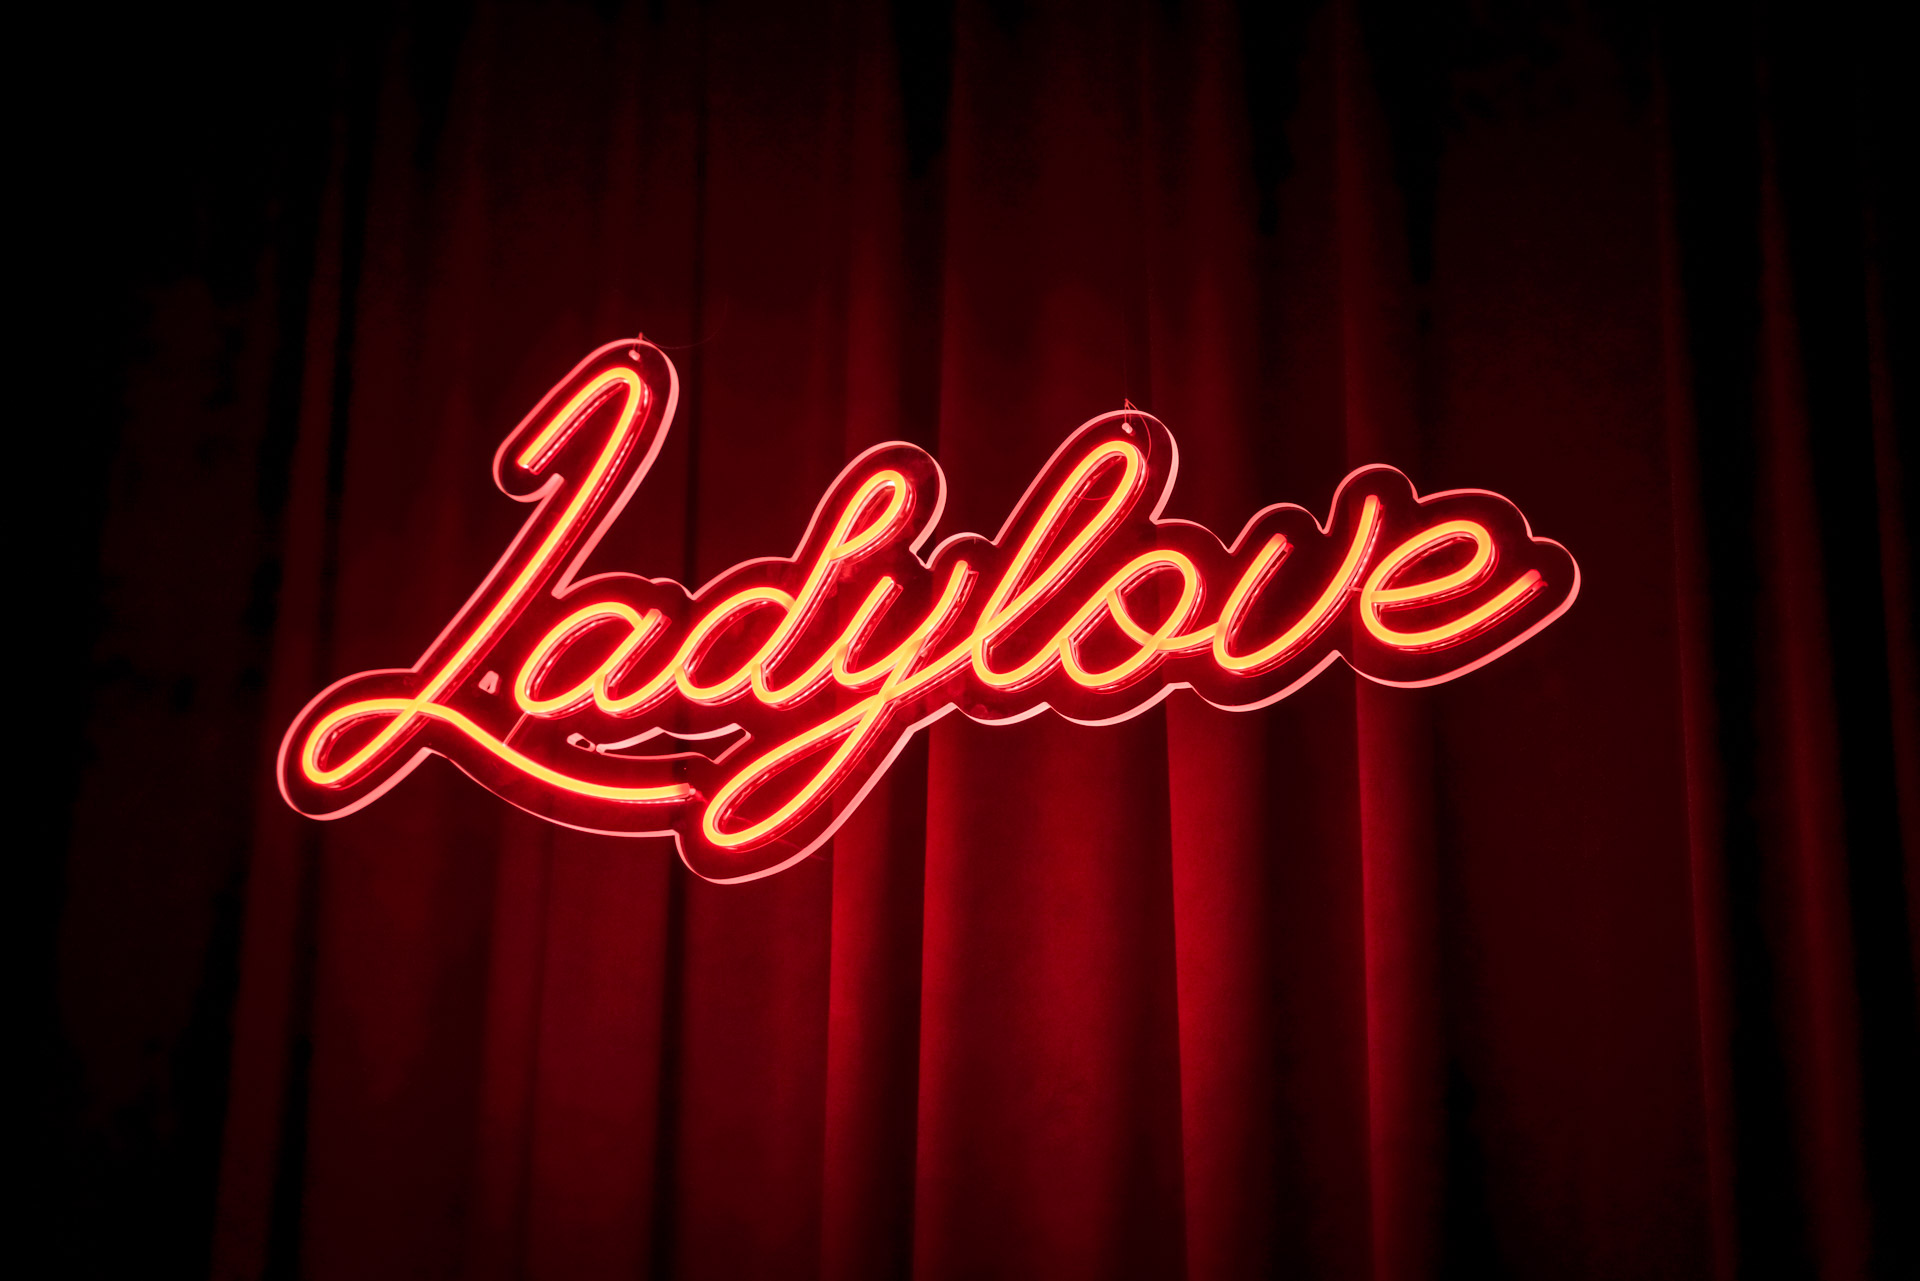 A neon sign that says Ladylove